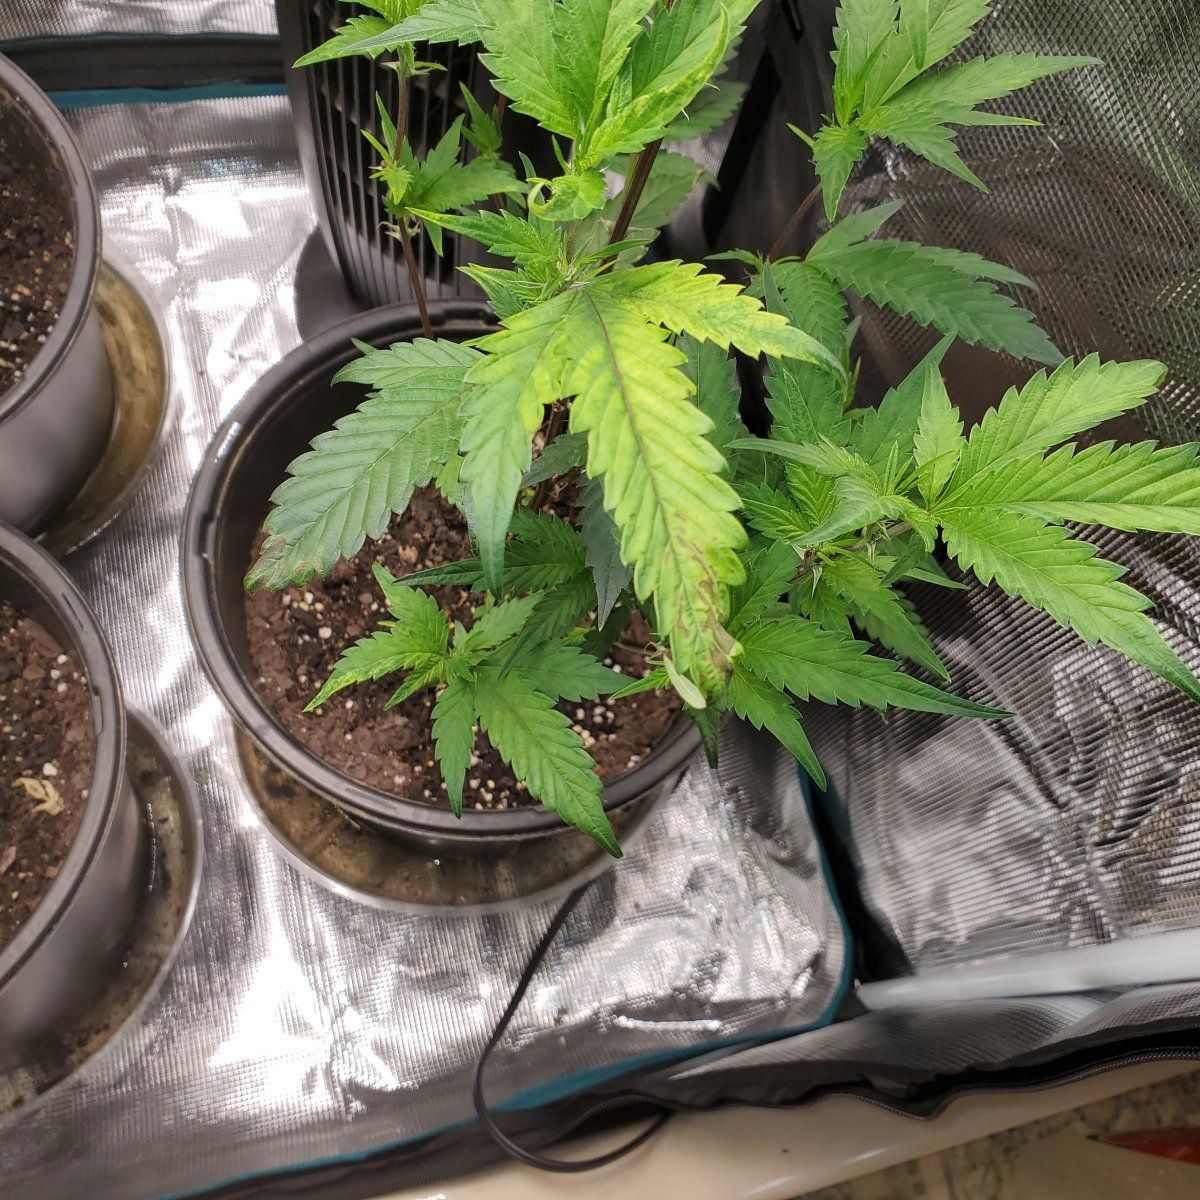 1st time grower deficiency or 5